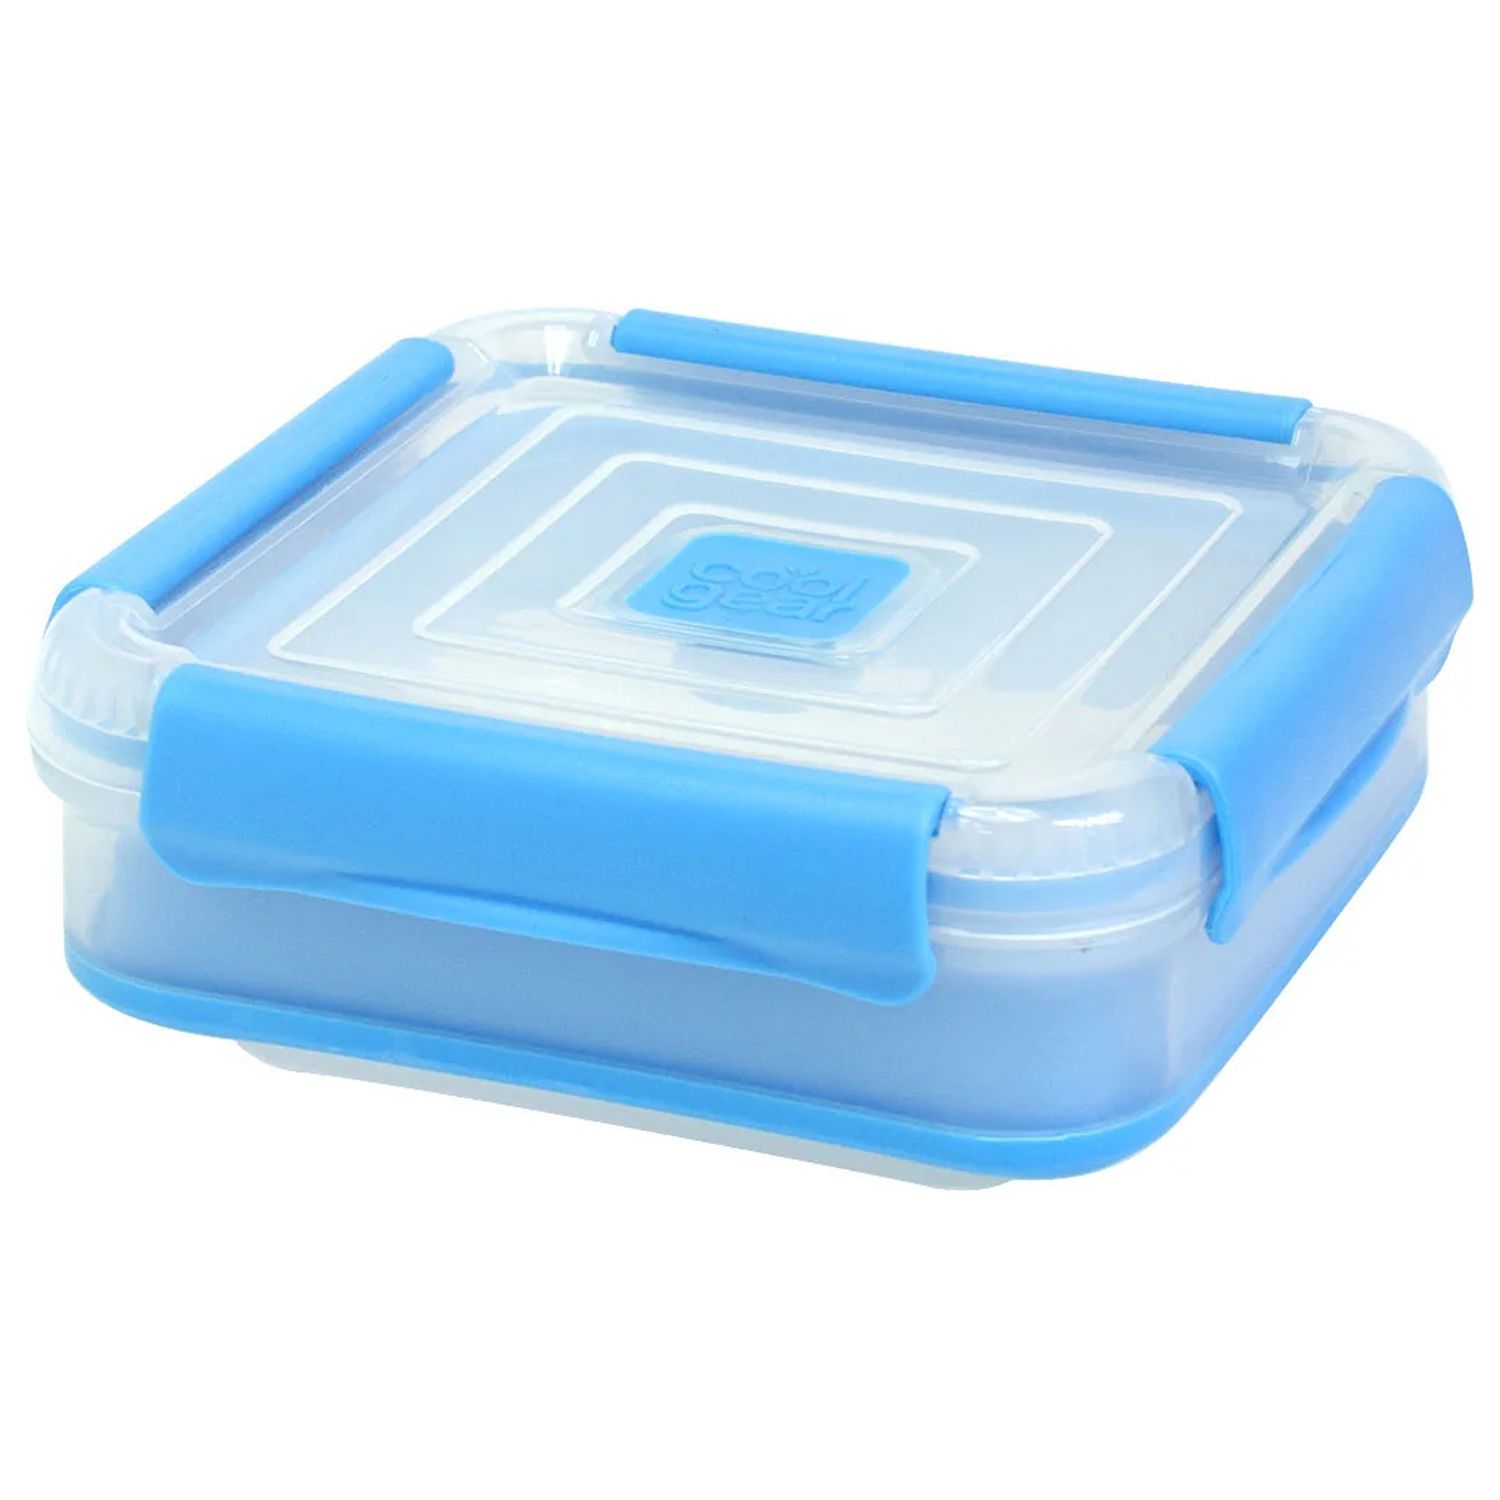 COOL GEAR 3-Pack Collapsible 7.5 Cup Square Food Container | Dishwasher and Microwave Safe | Perfect for On The Go Lunches and Leftovers | Expands to Hold 2x More | Air Tight Snaps Keeps Food Fresh - image 2 of 5